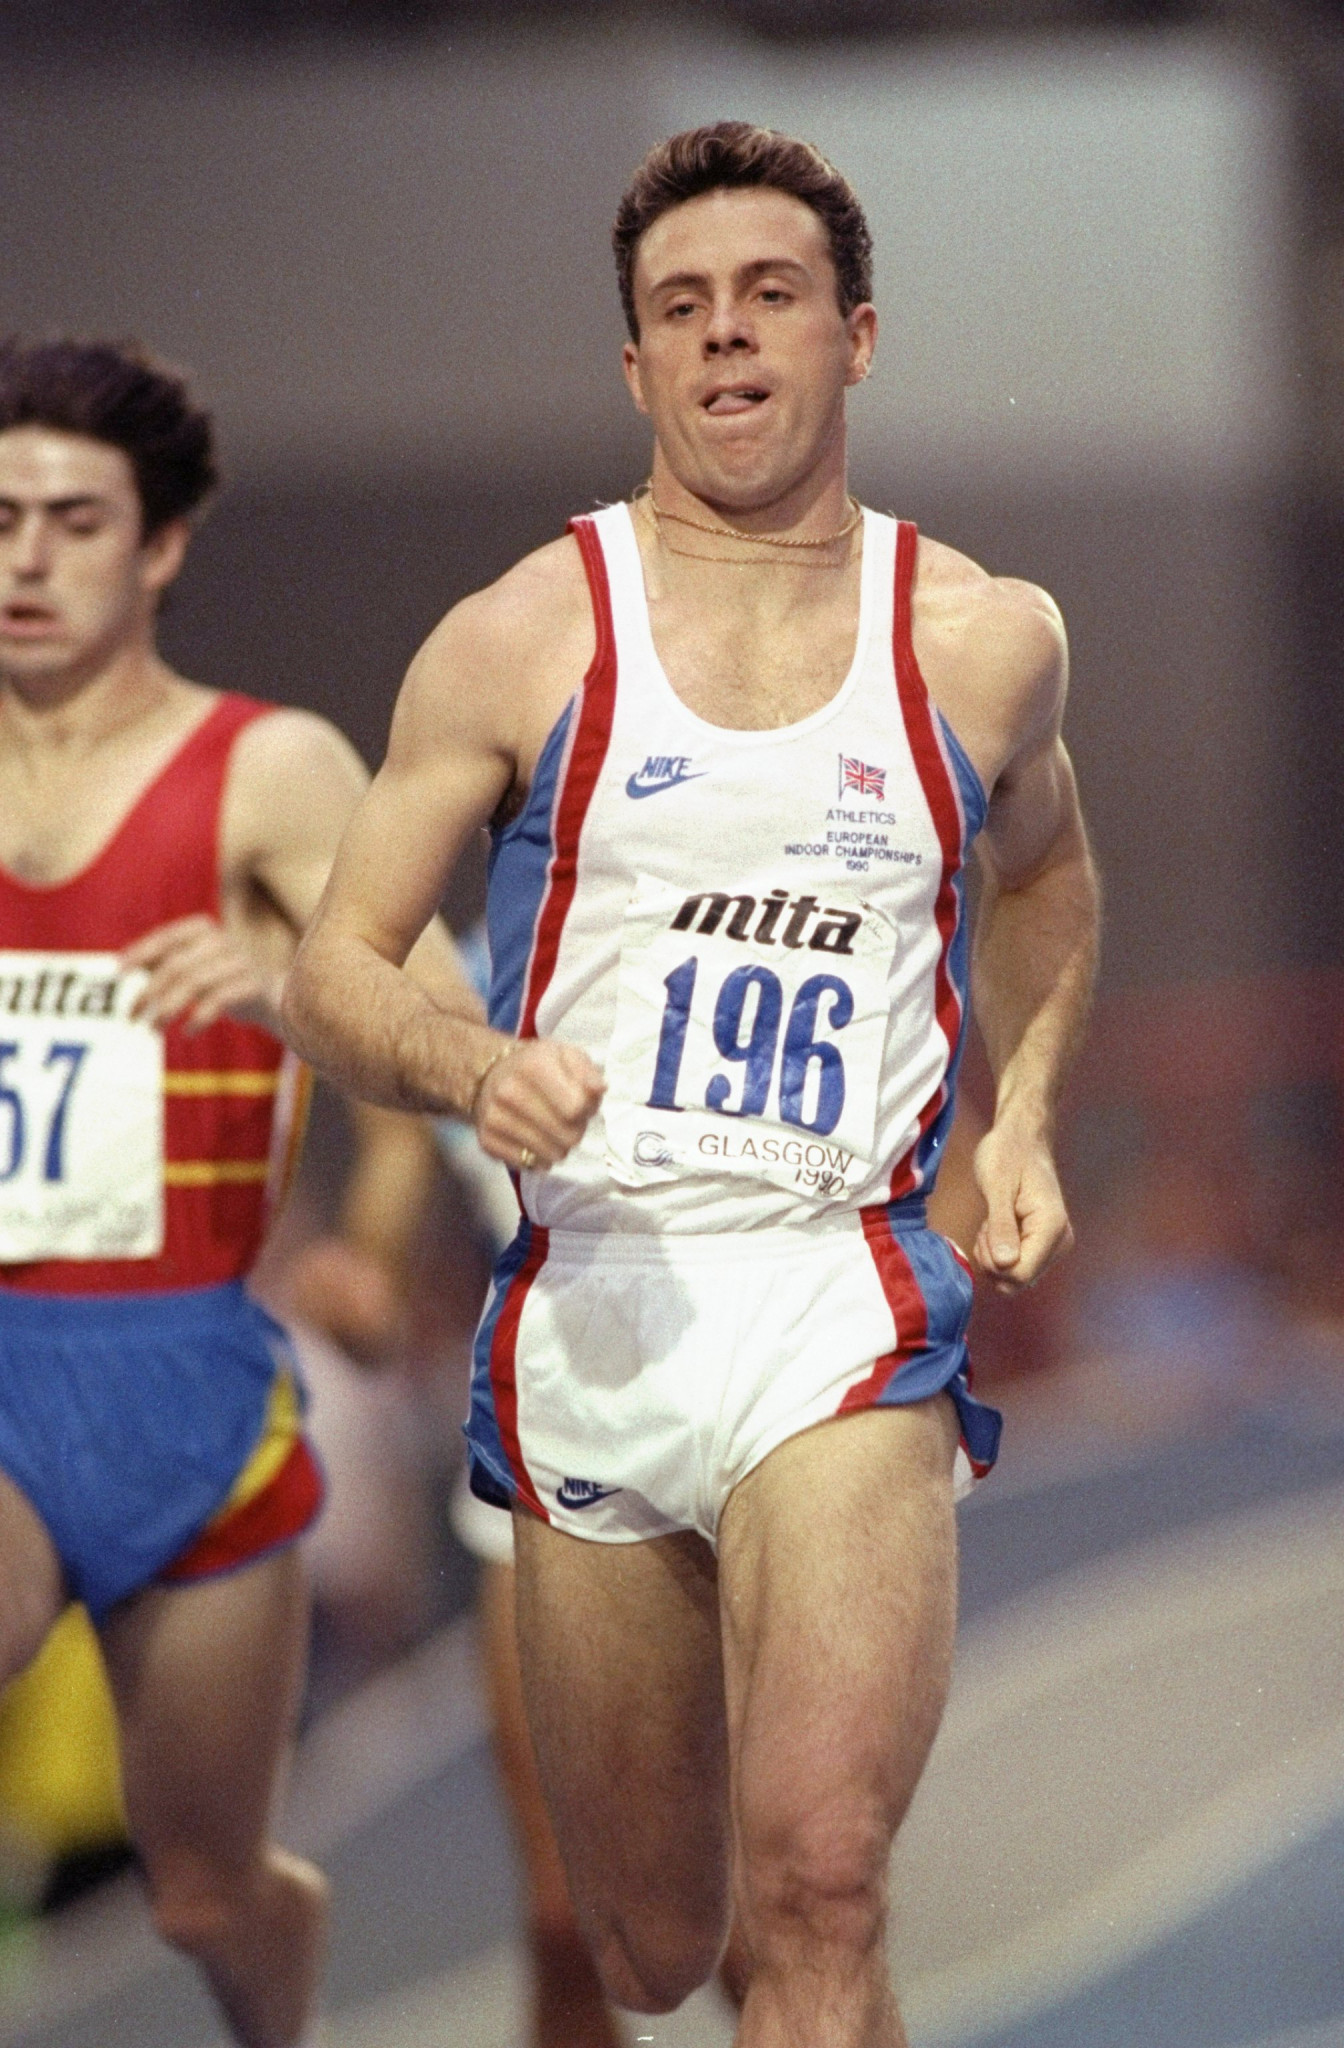 Scotland's Tom McKean becomes a local hero as he wins the gold medal in the 800m at the 1990 European Athletics Indoor Championships in Glasgow's Kelvin Hall arena ©Getty Images 